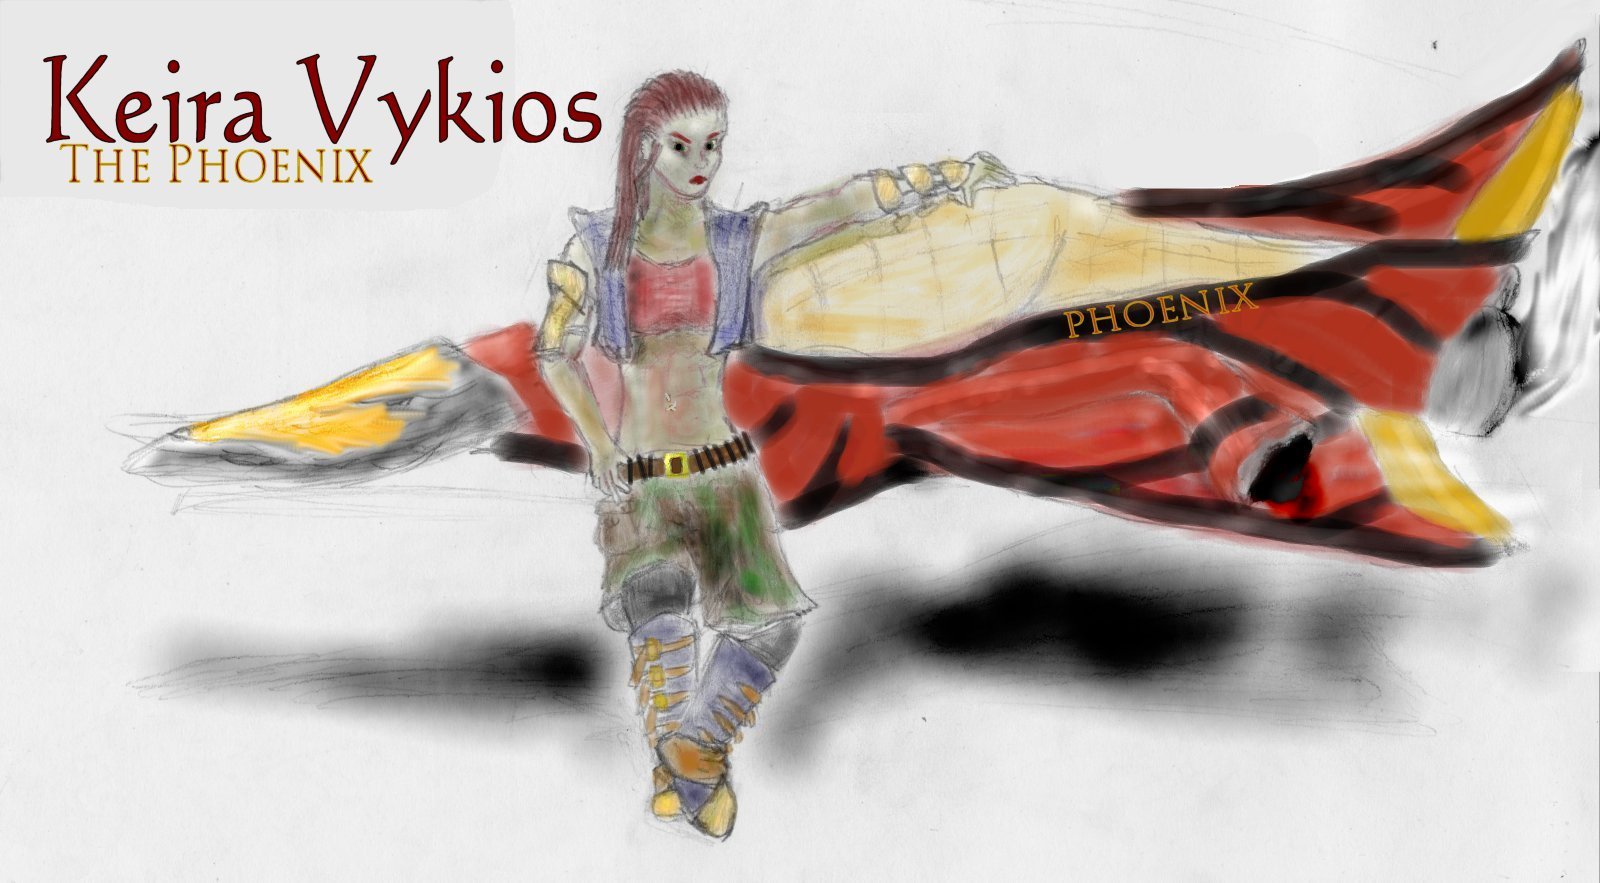 Keira Vykios - From My Submitted Story by Orlando_Hamar